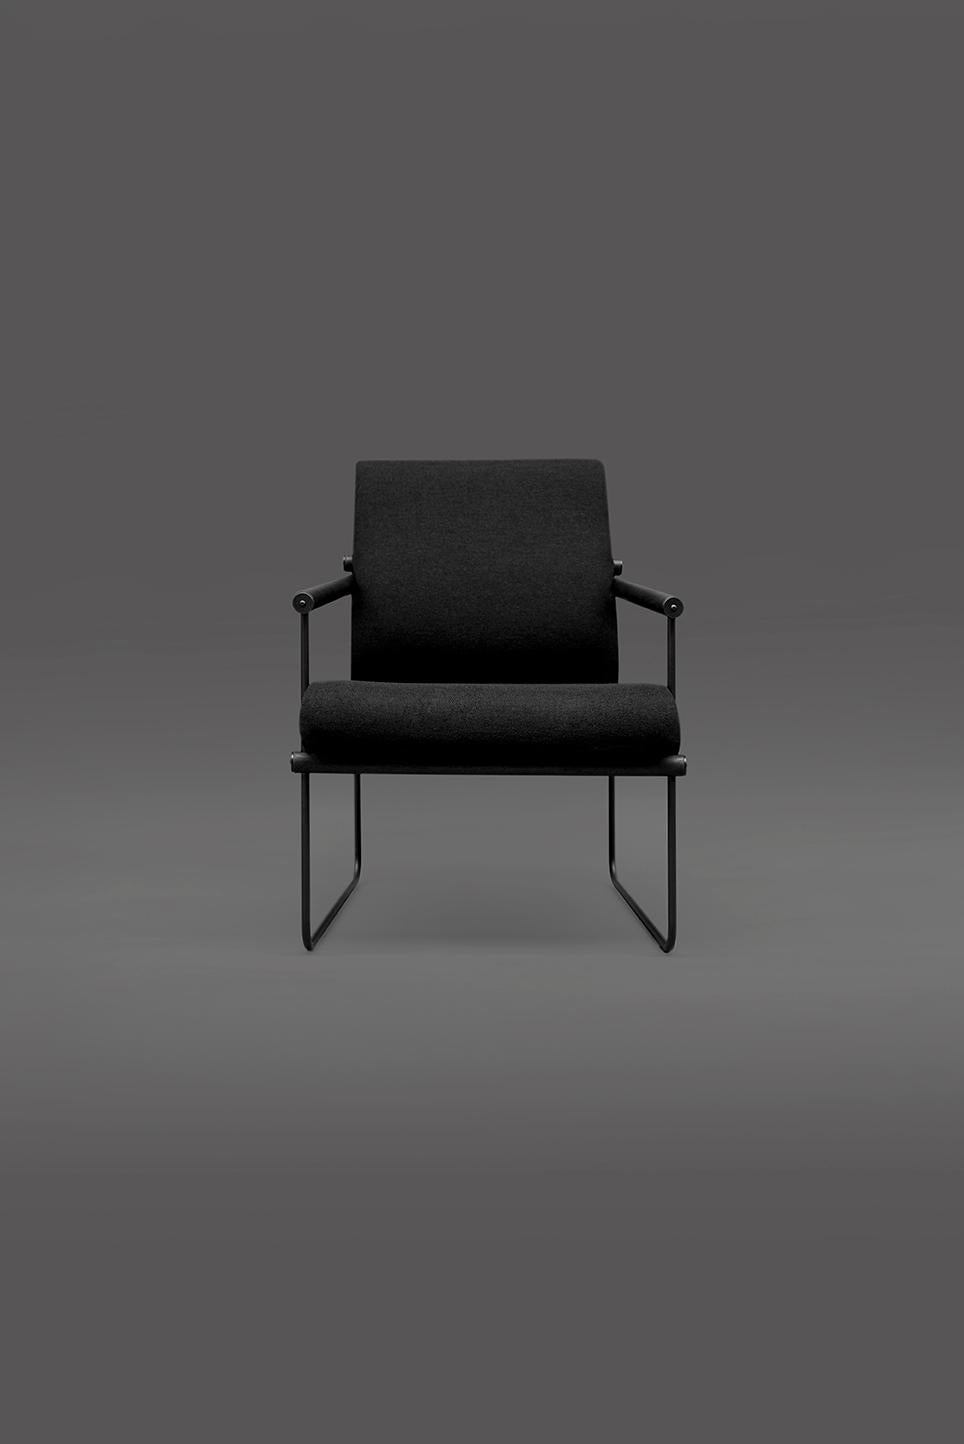 This mid-century modern 'Audrey' S12 armchair was designed by interior designer and architect Peter Ghyczy in 2017 and hand-crafted in the GHYCZY atelier. The backrest can be adjusted to the preferences of its owner. The chair’s playful construction